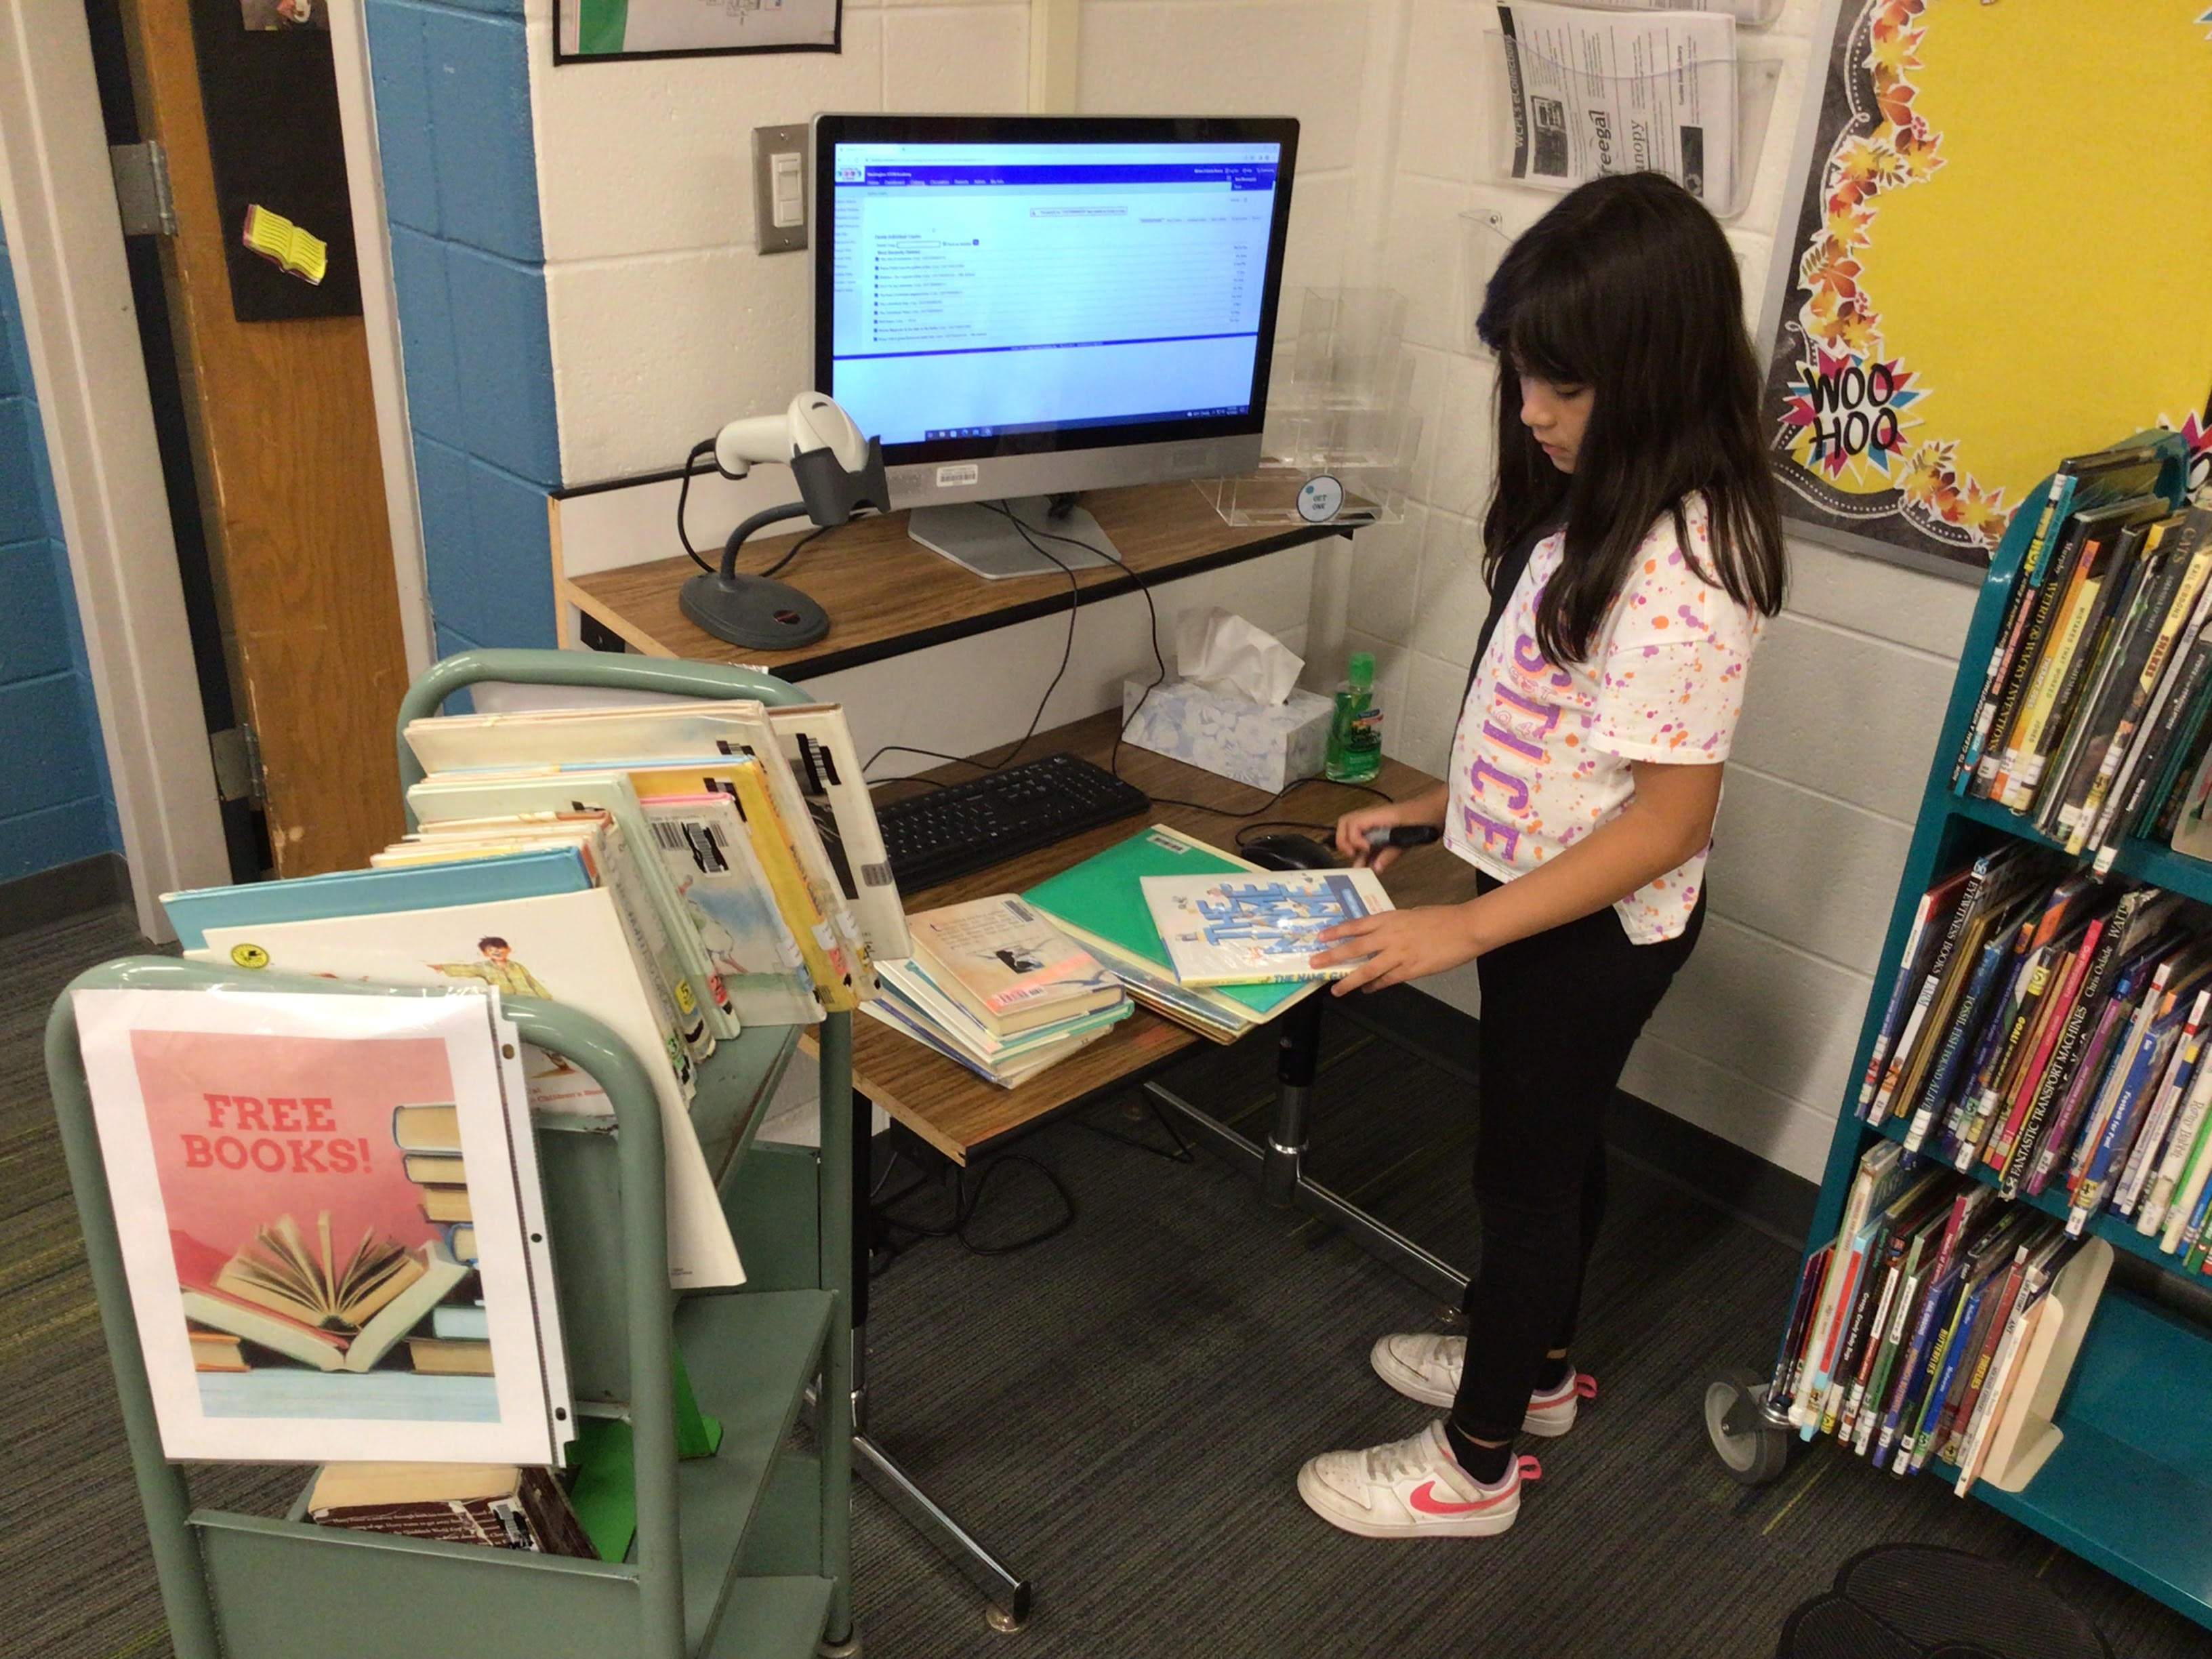 Student at the library computer surrounded by books